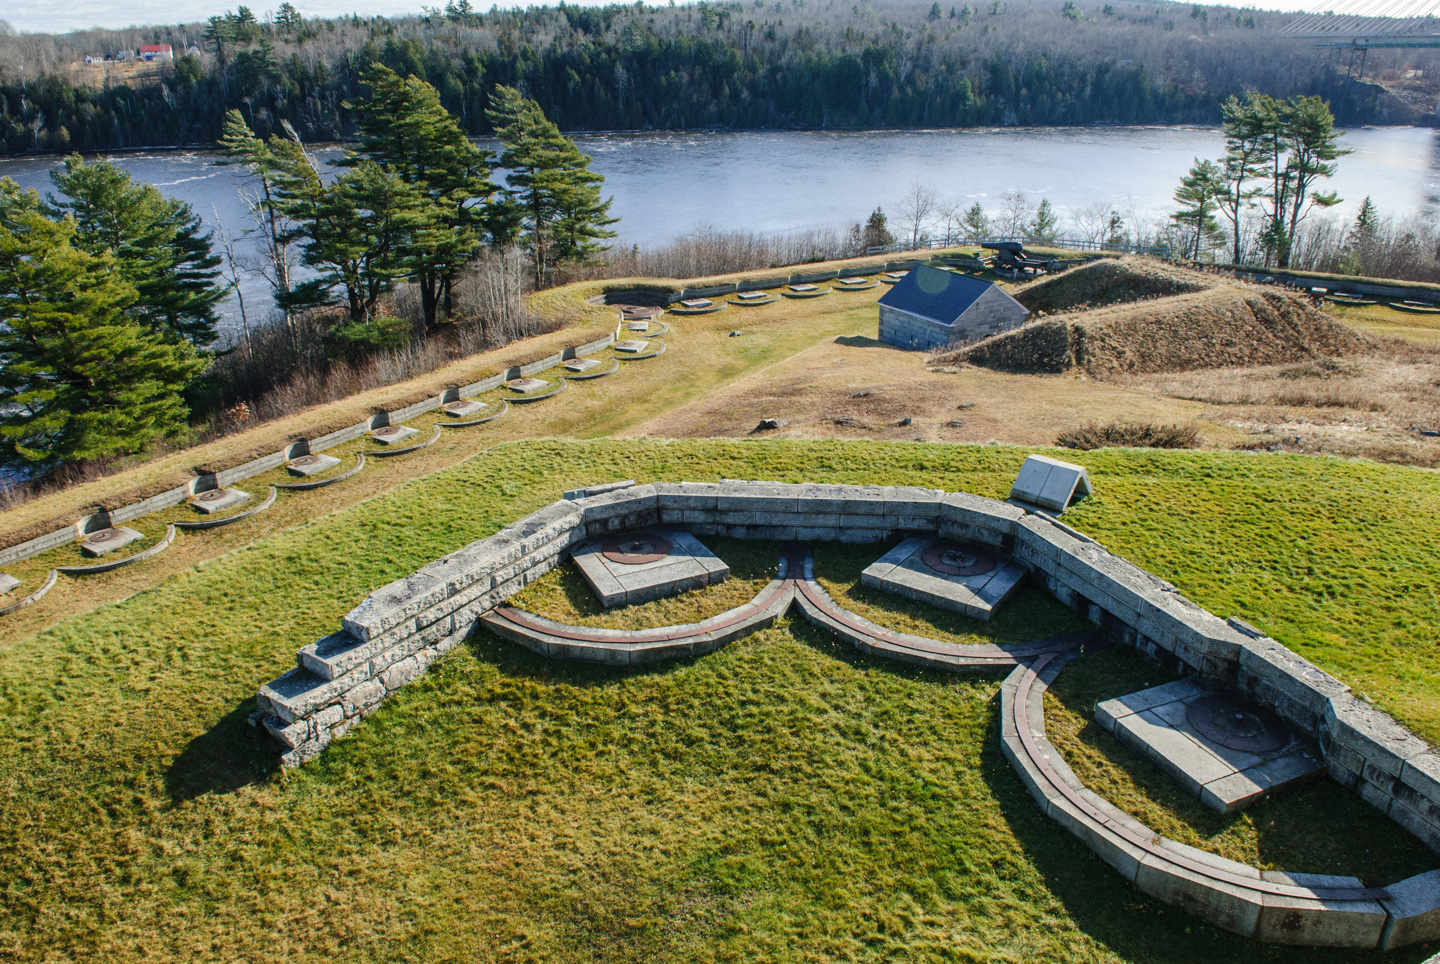 mountings for canons, Fort Knox, Maine